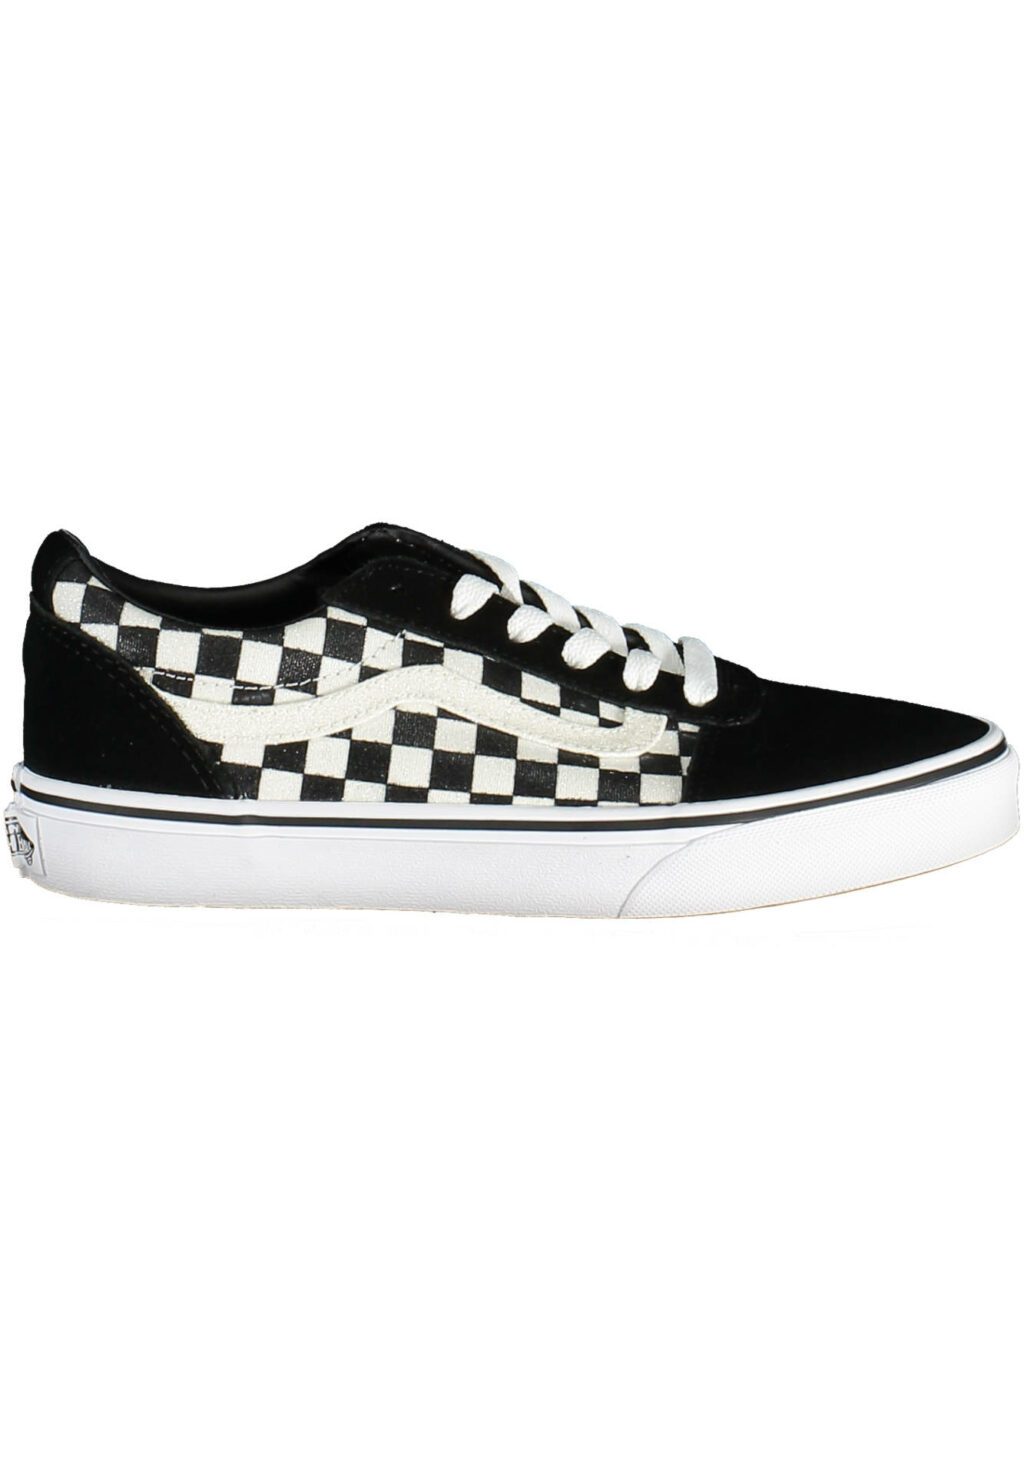 VANS BLACK GIRL SPORT SHOES VN0A3TFW_NERO_8AG